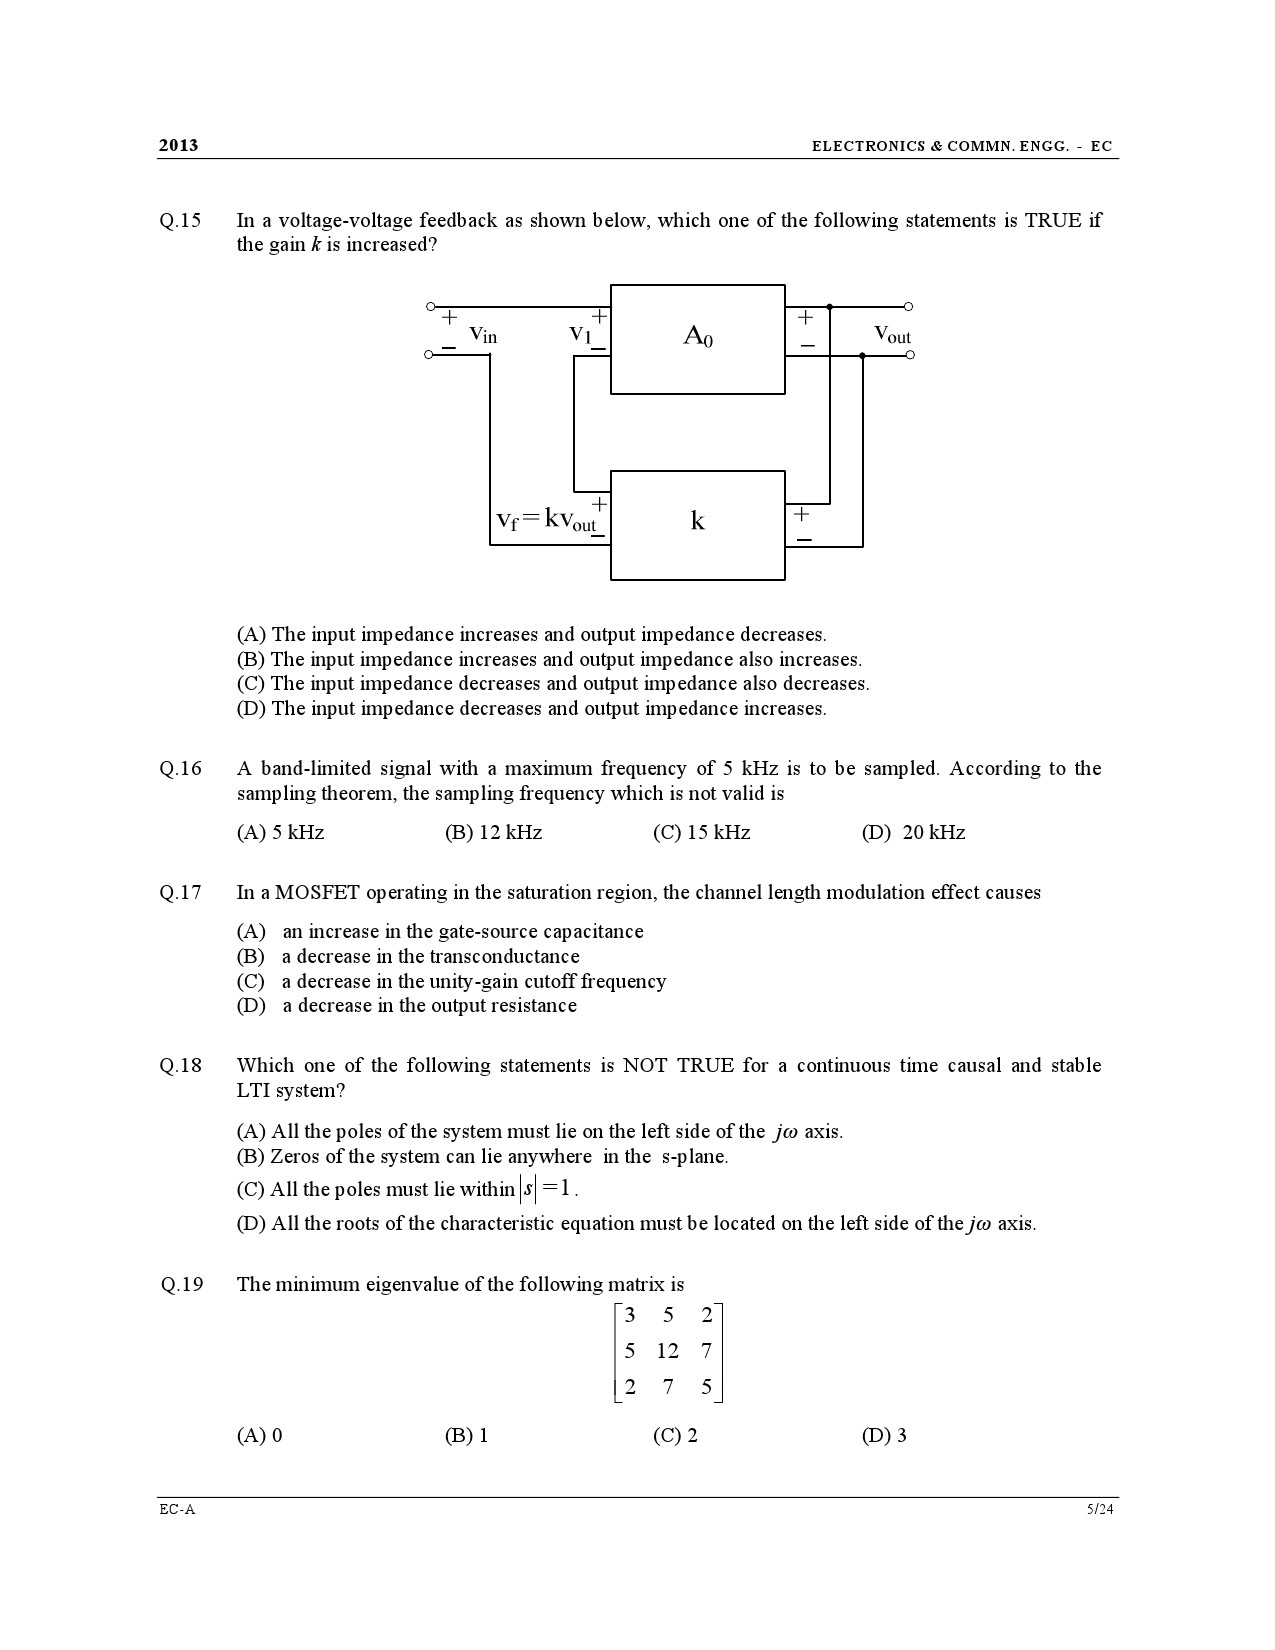 GATE Exam Question Paper 2013 Electronics and Communication Engineering 5